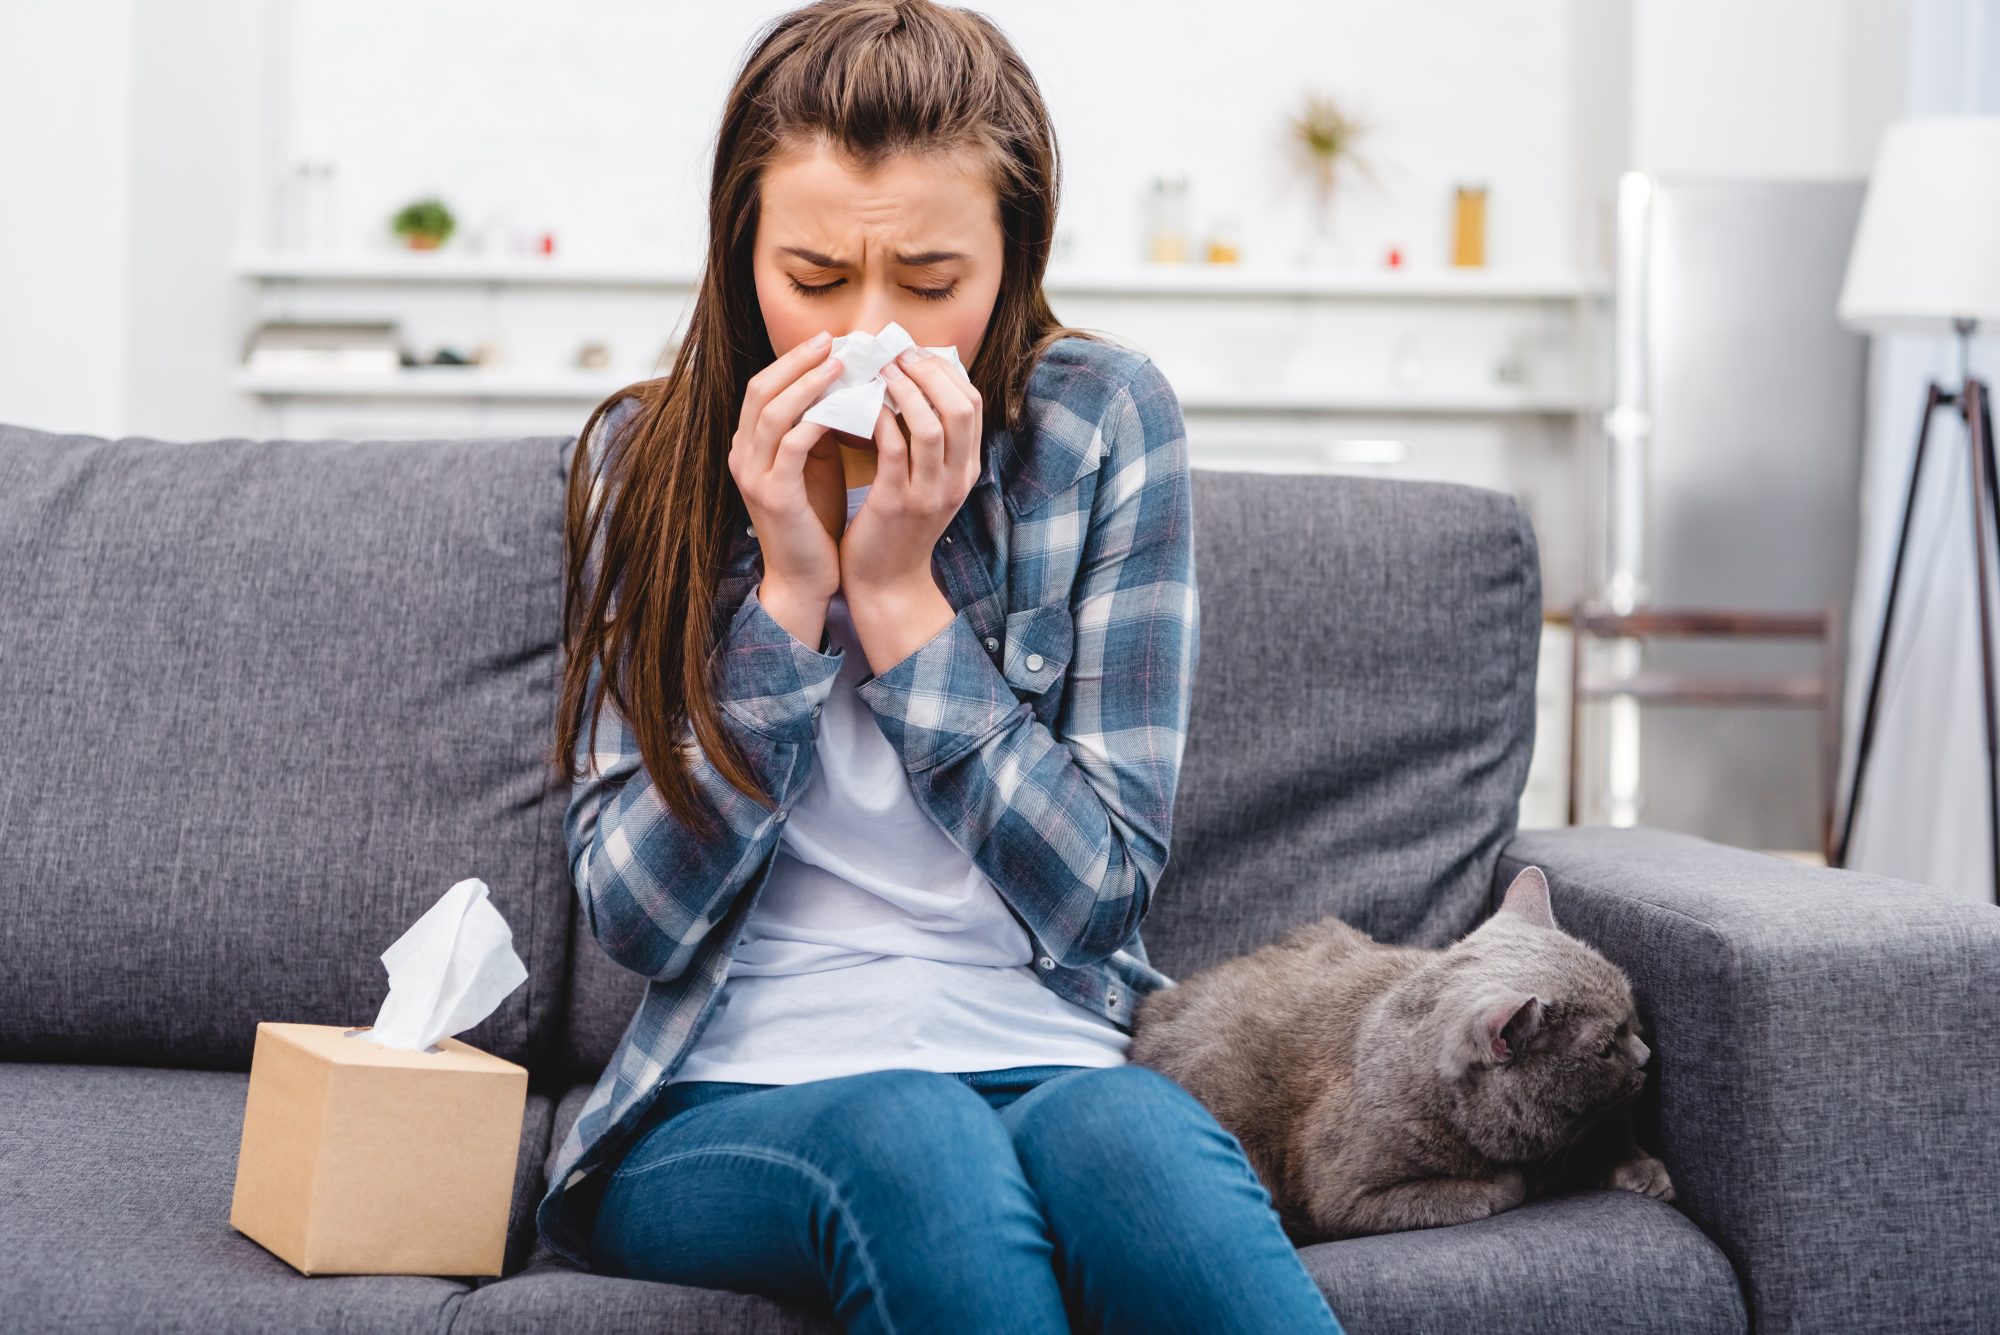 girl blowing nose in facial tissue while sitting with cat on couch